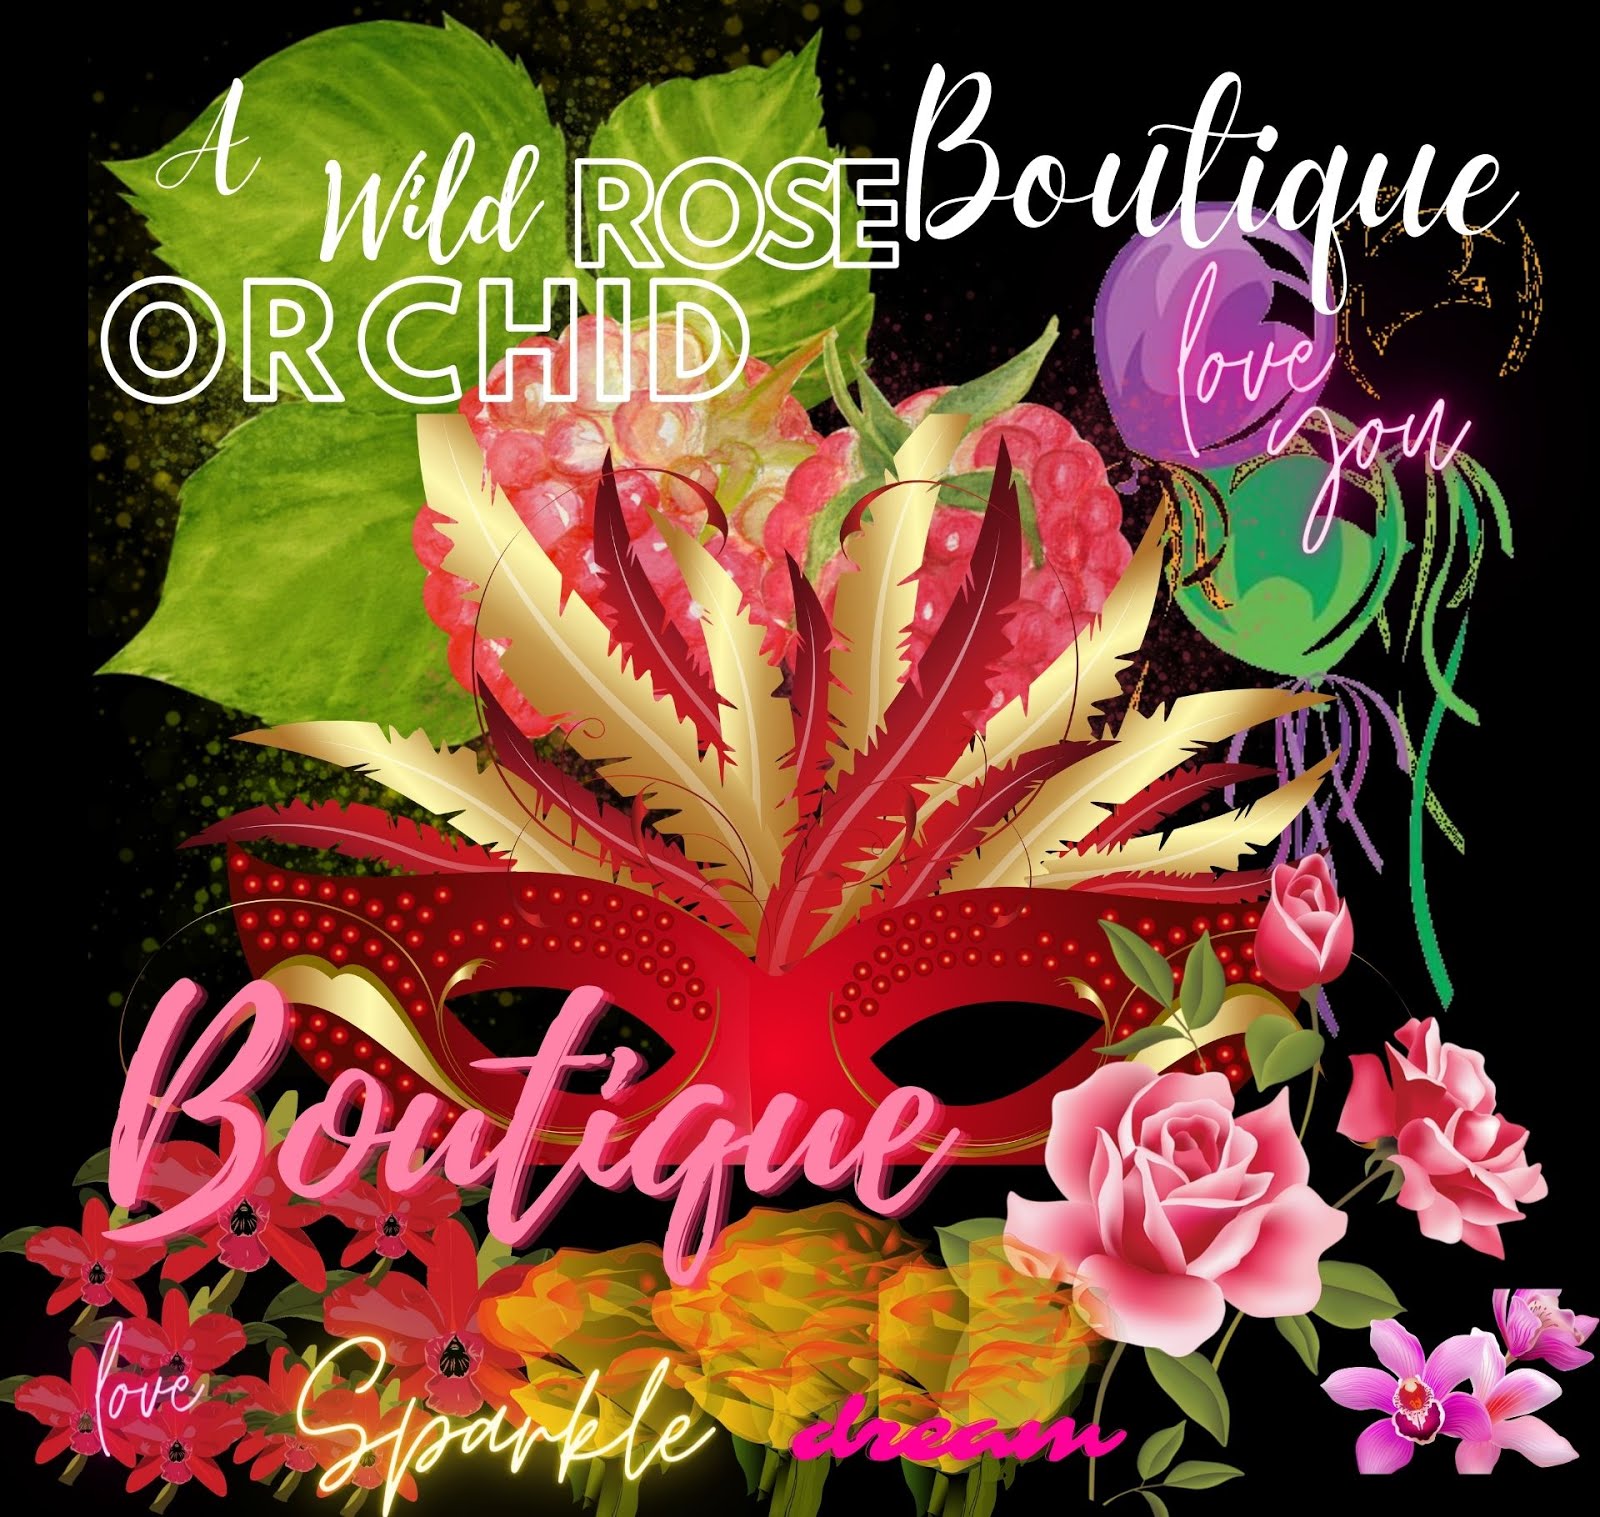 A Wild Orchid Rose Boutique